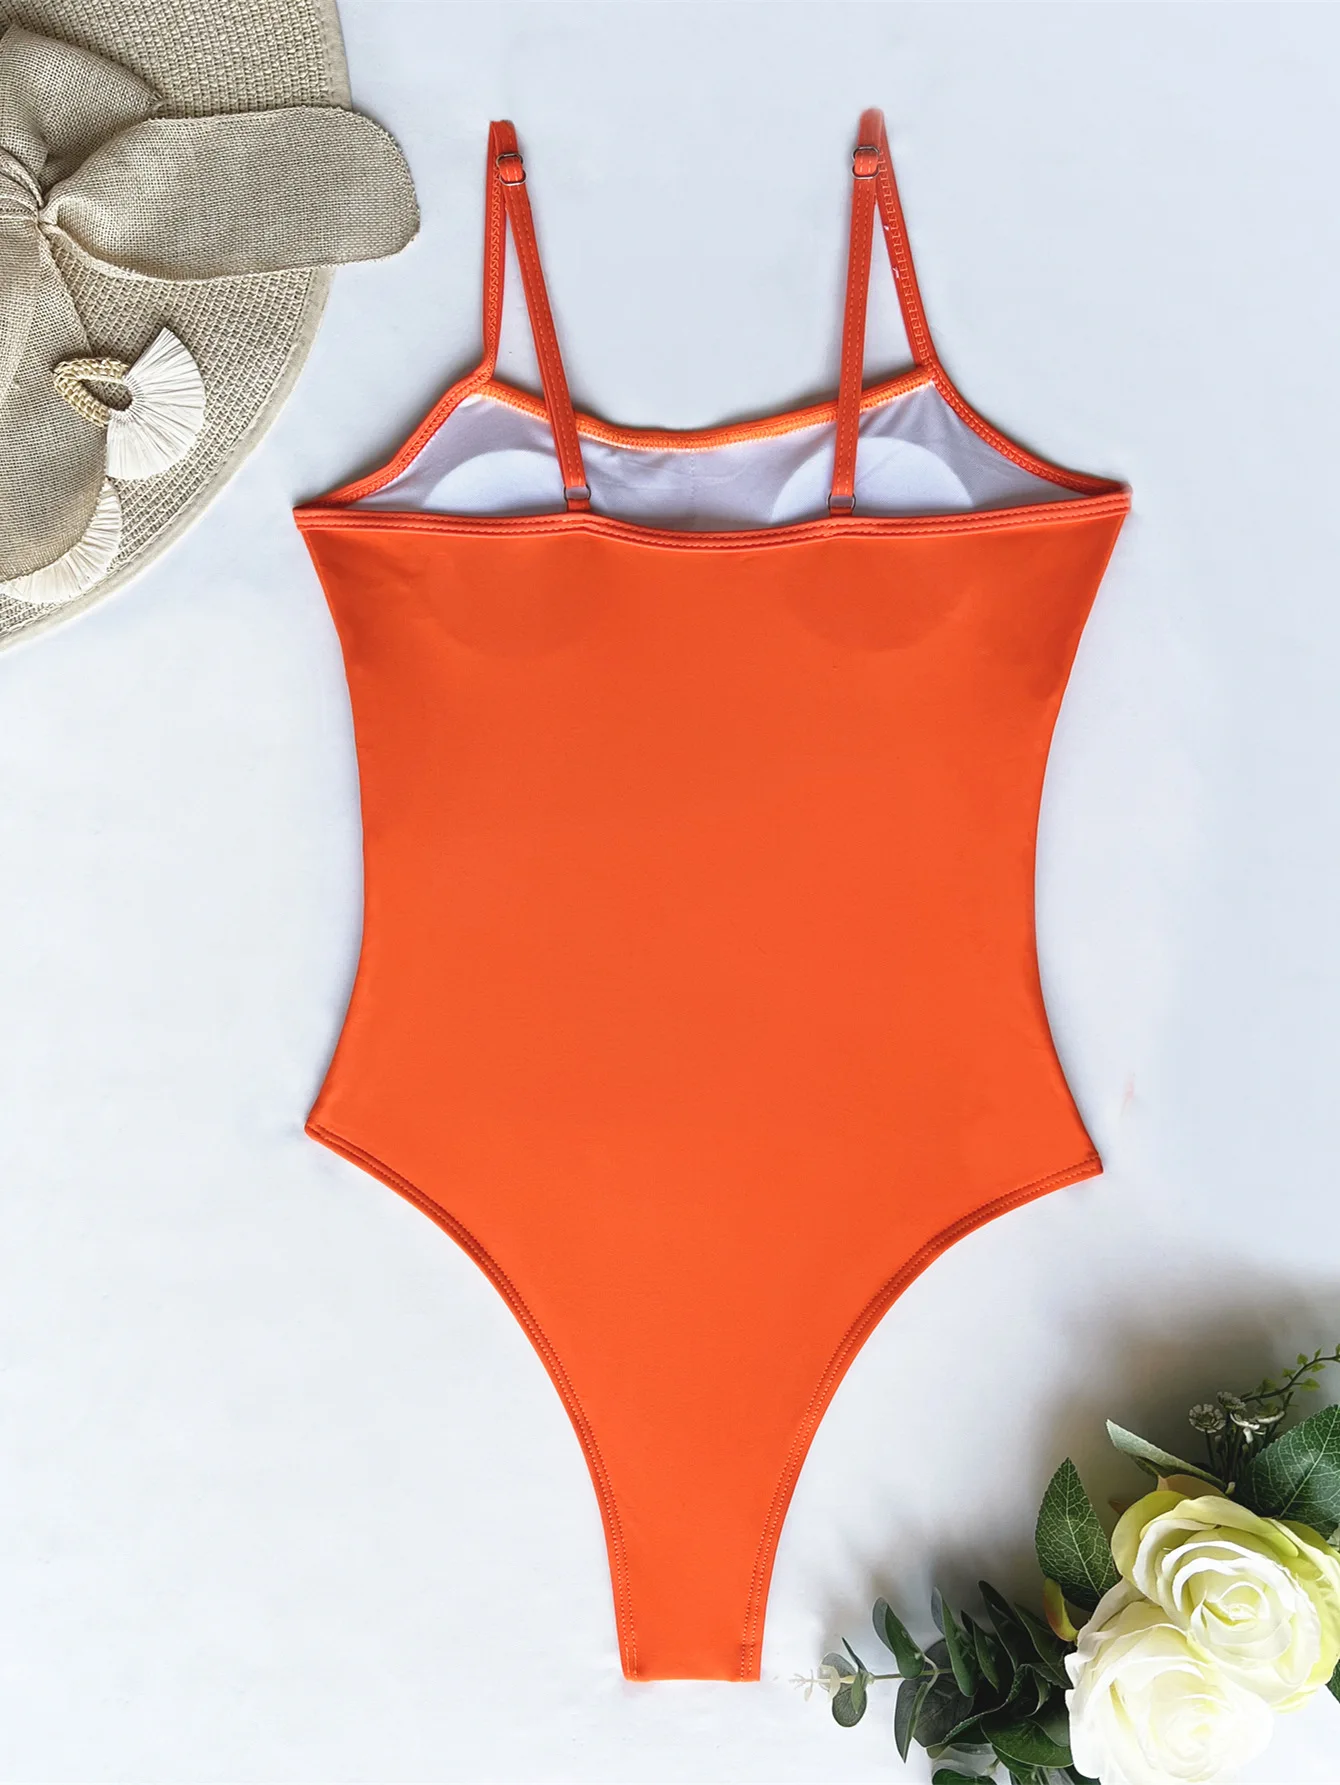 Swimming Suit for Women One-piece Swimsuit Solid Color Sexy Swimsuit Female Hollow Swimsuit Mesh Push Up Bikini Bathing Suits cheeky bikini sets